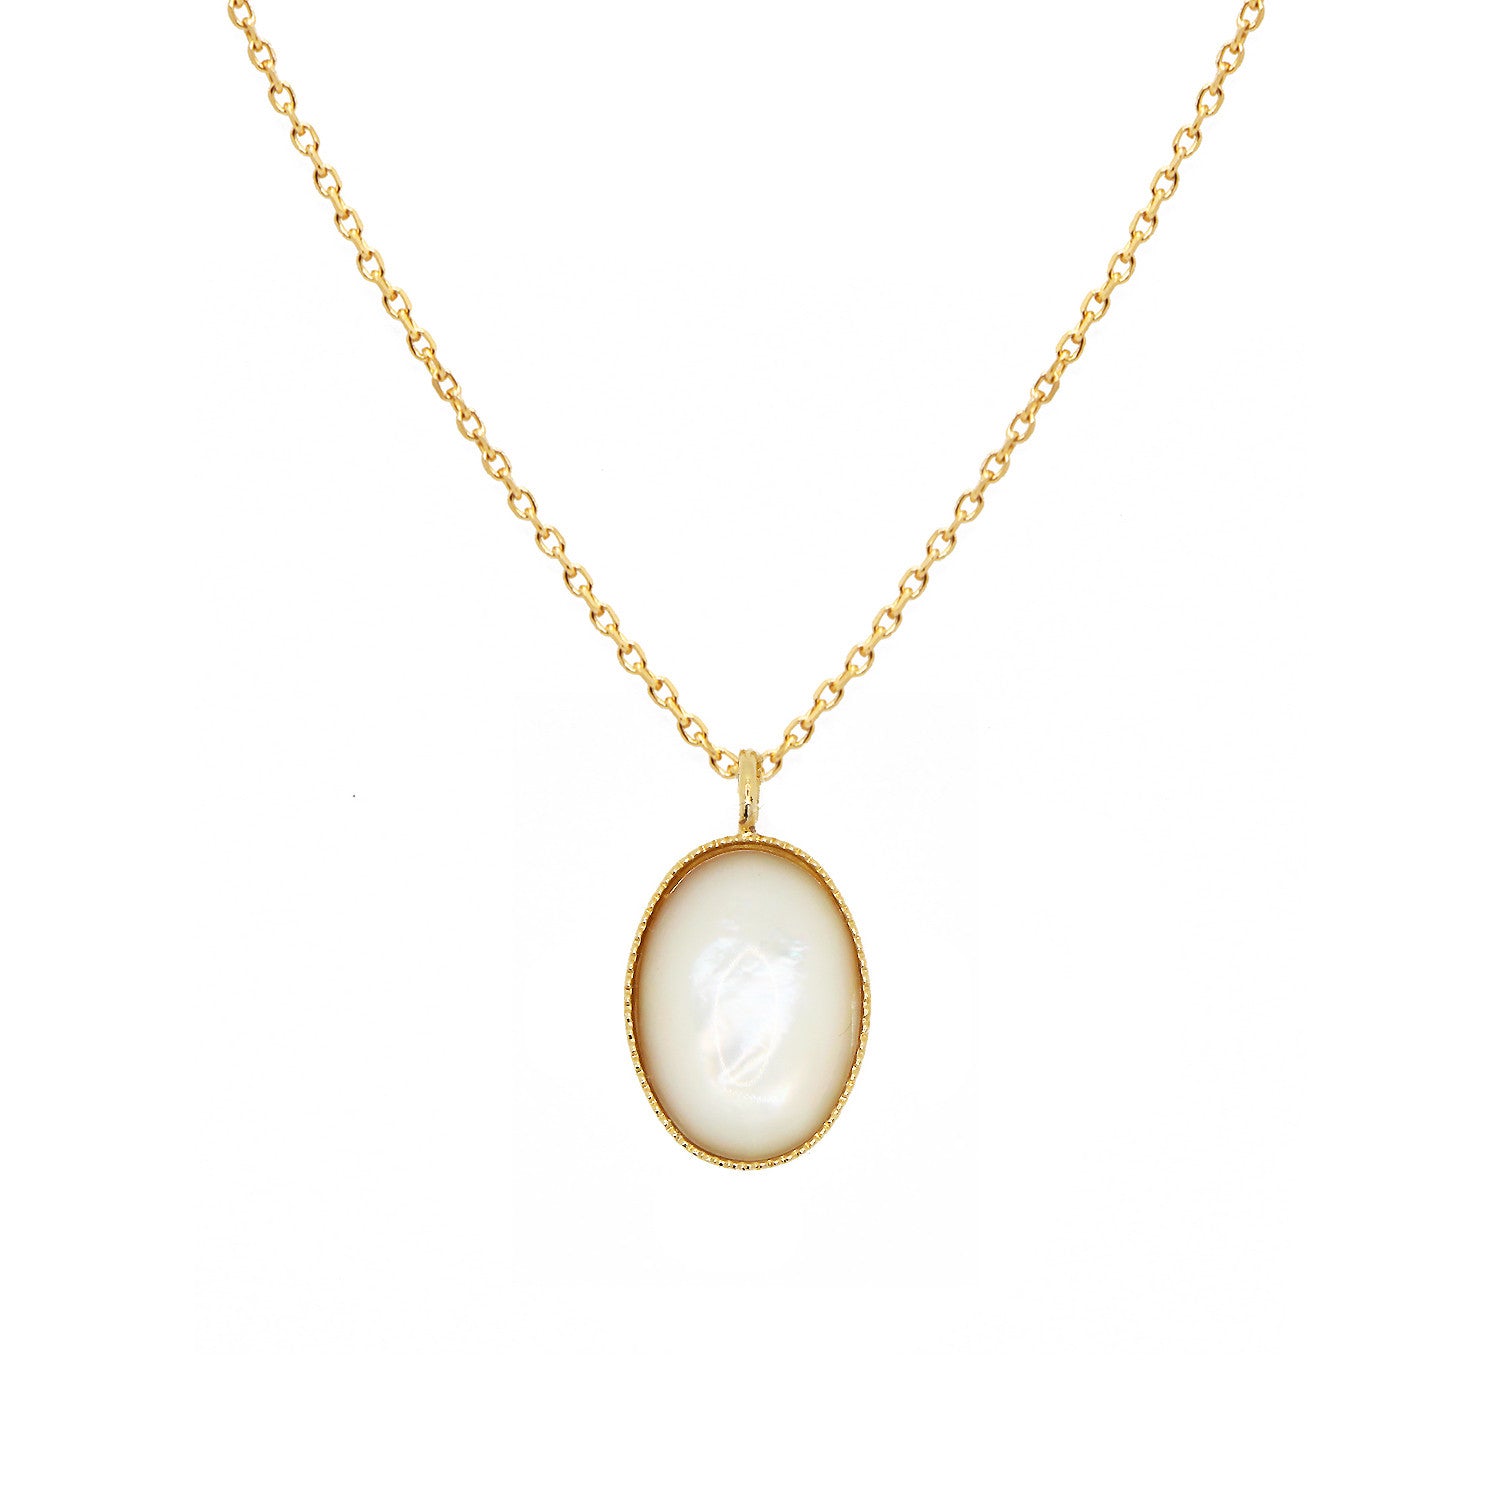 Calypso Mother of Pearl Necklace